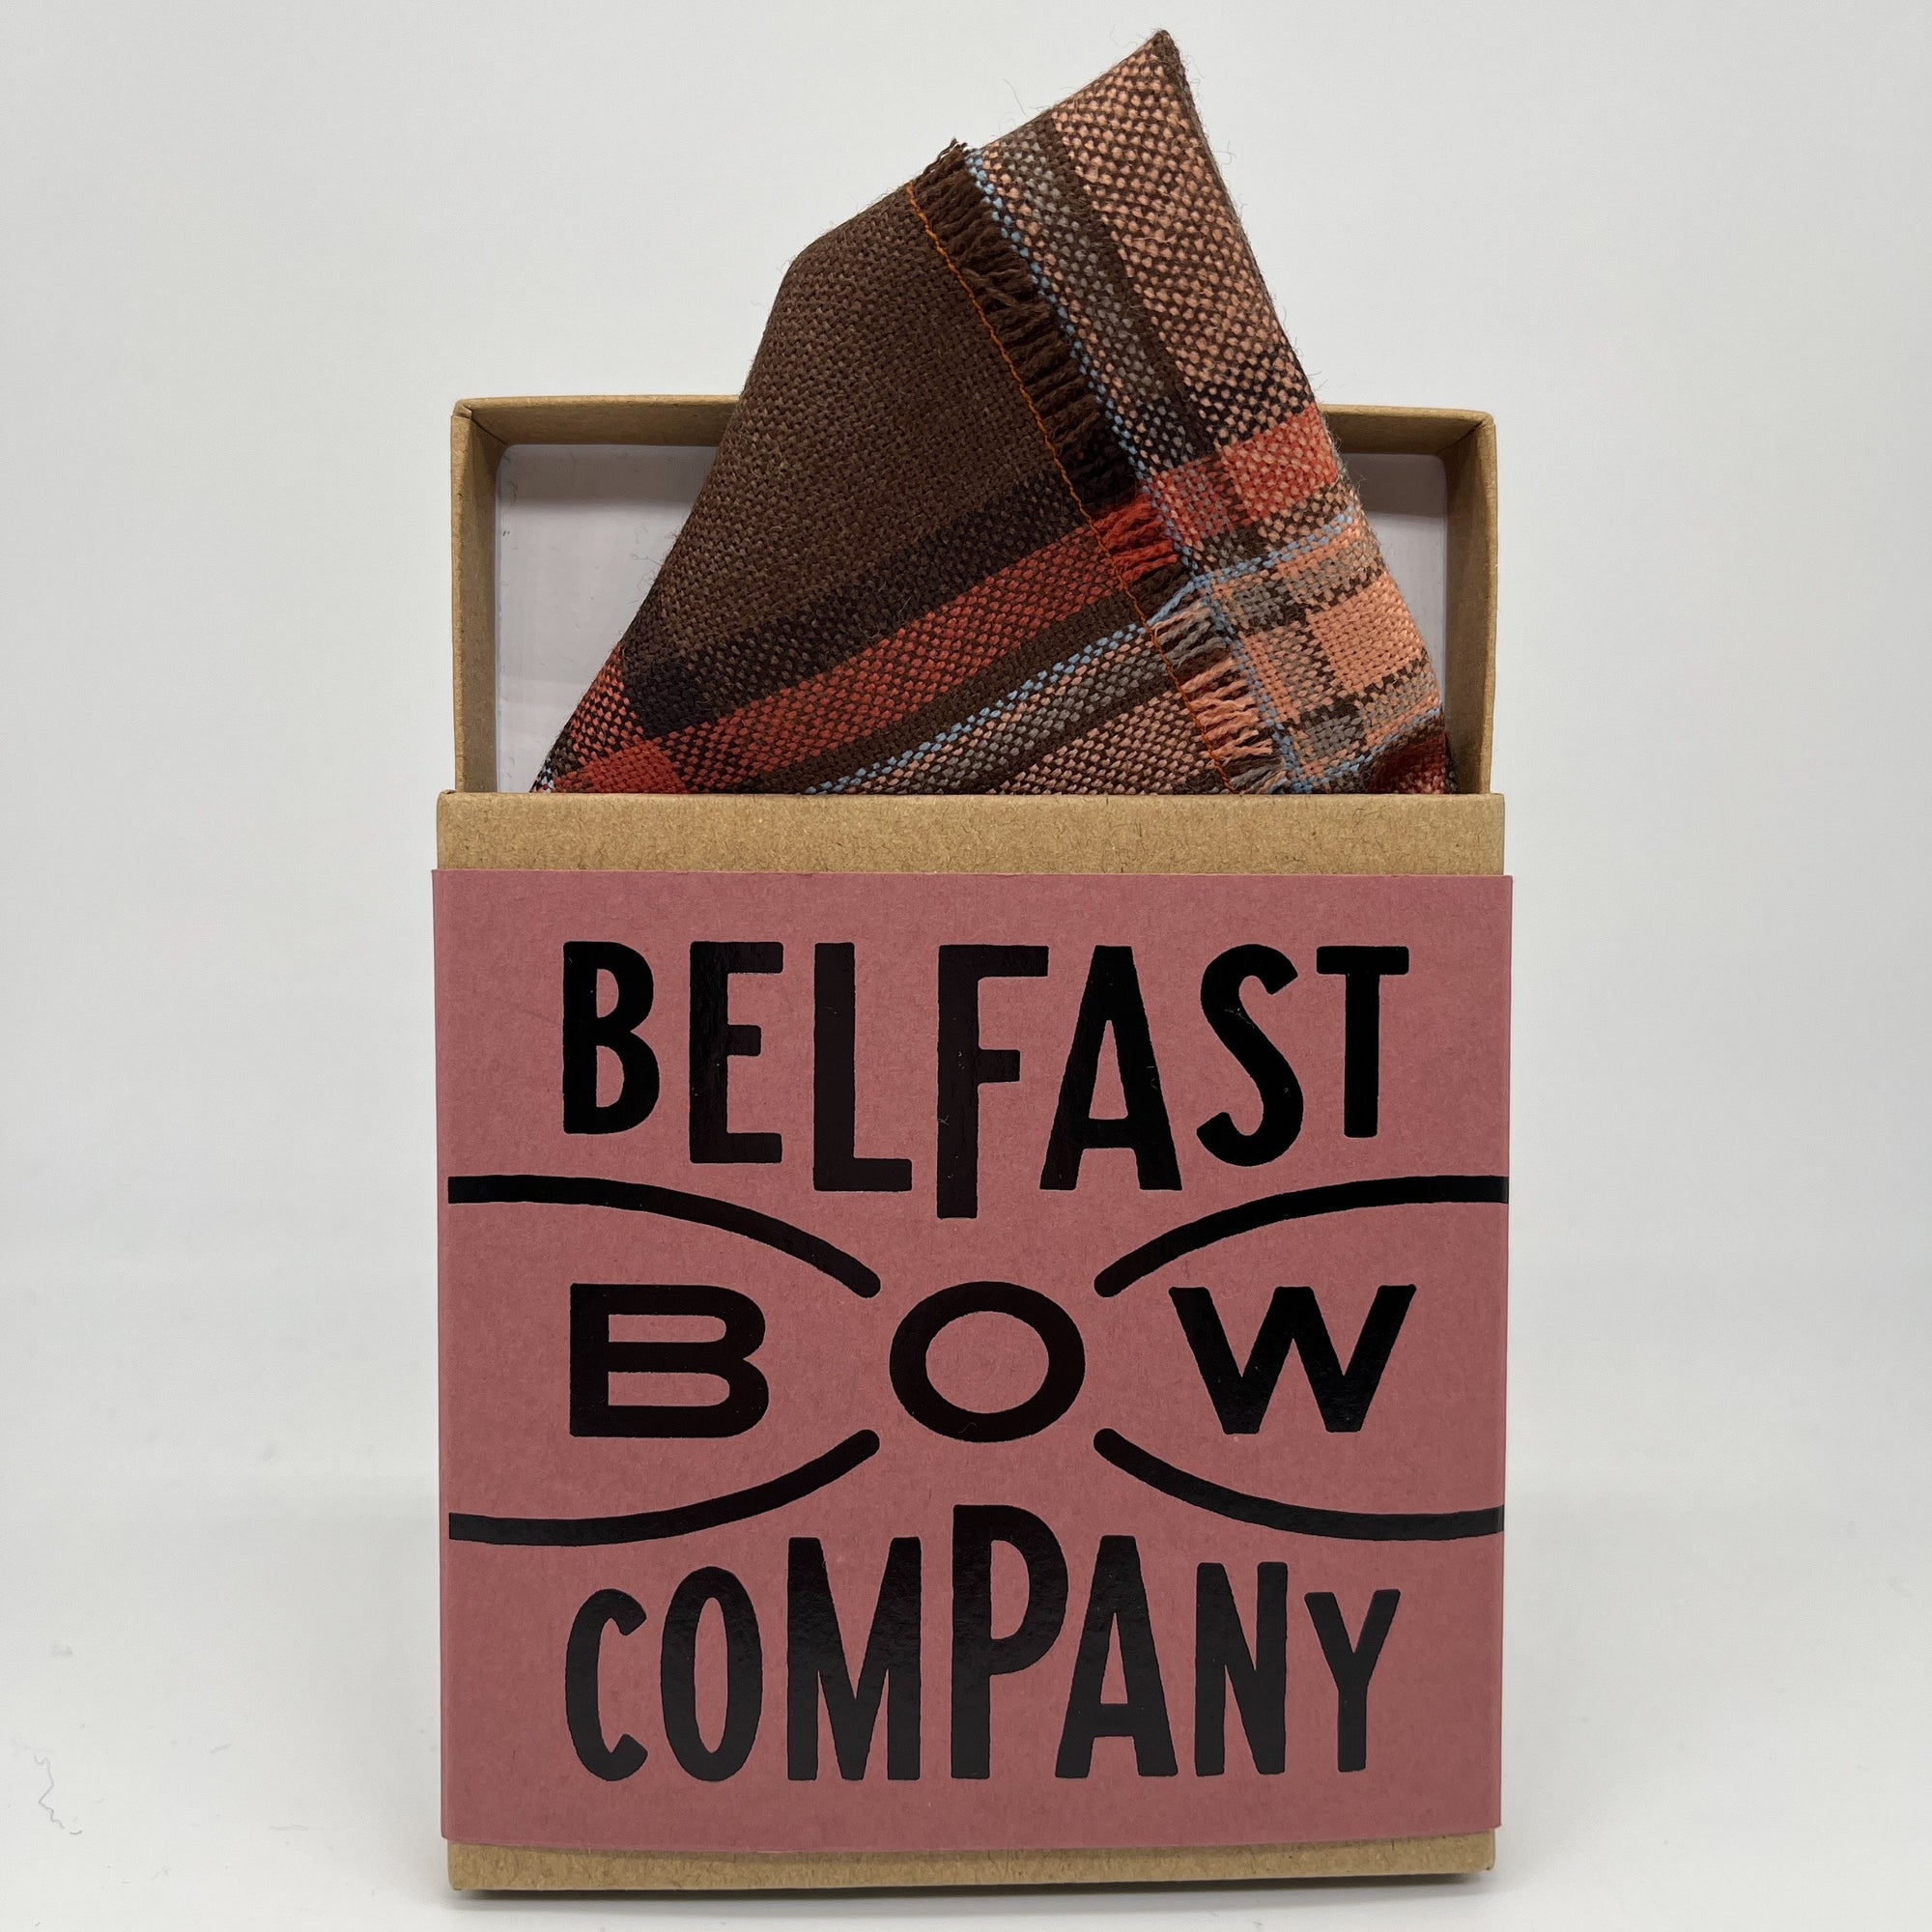 County Down Tartan Pocket Square by the Belfast Bow Company